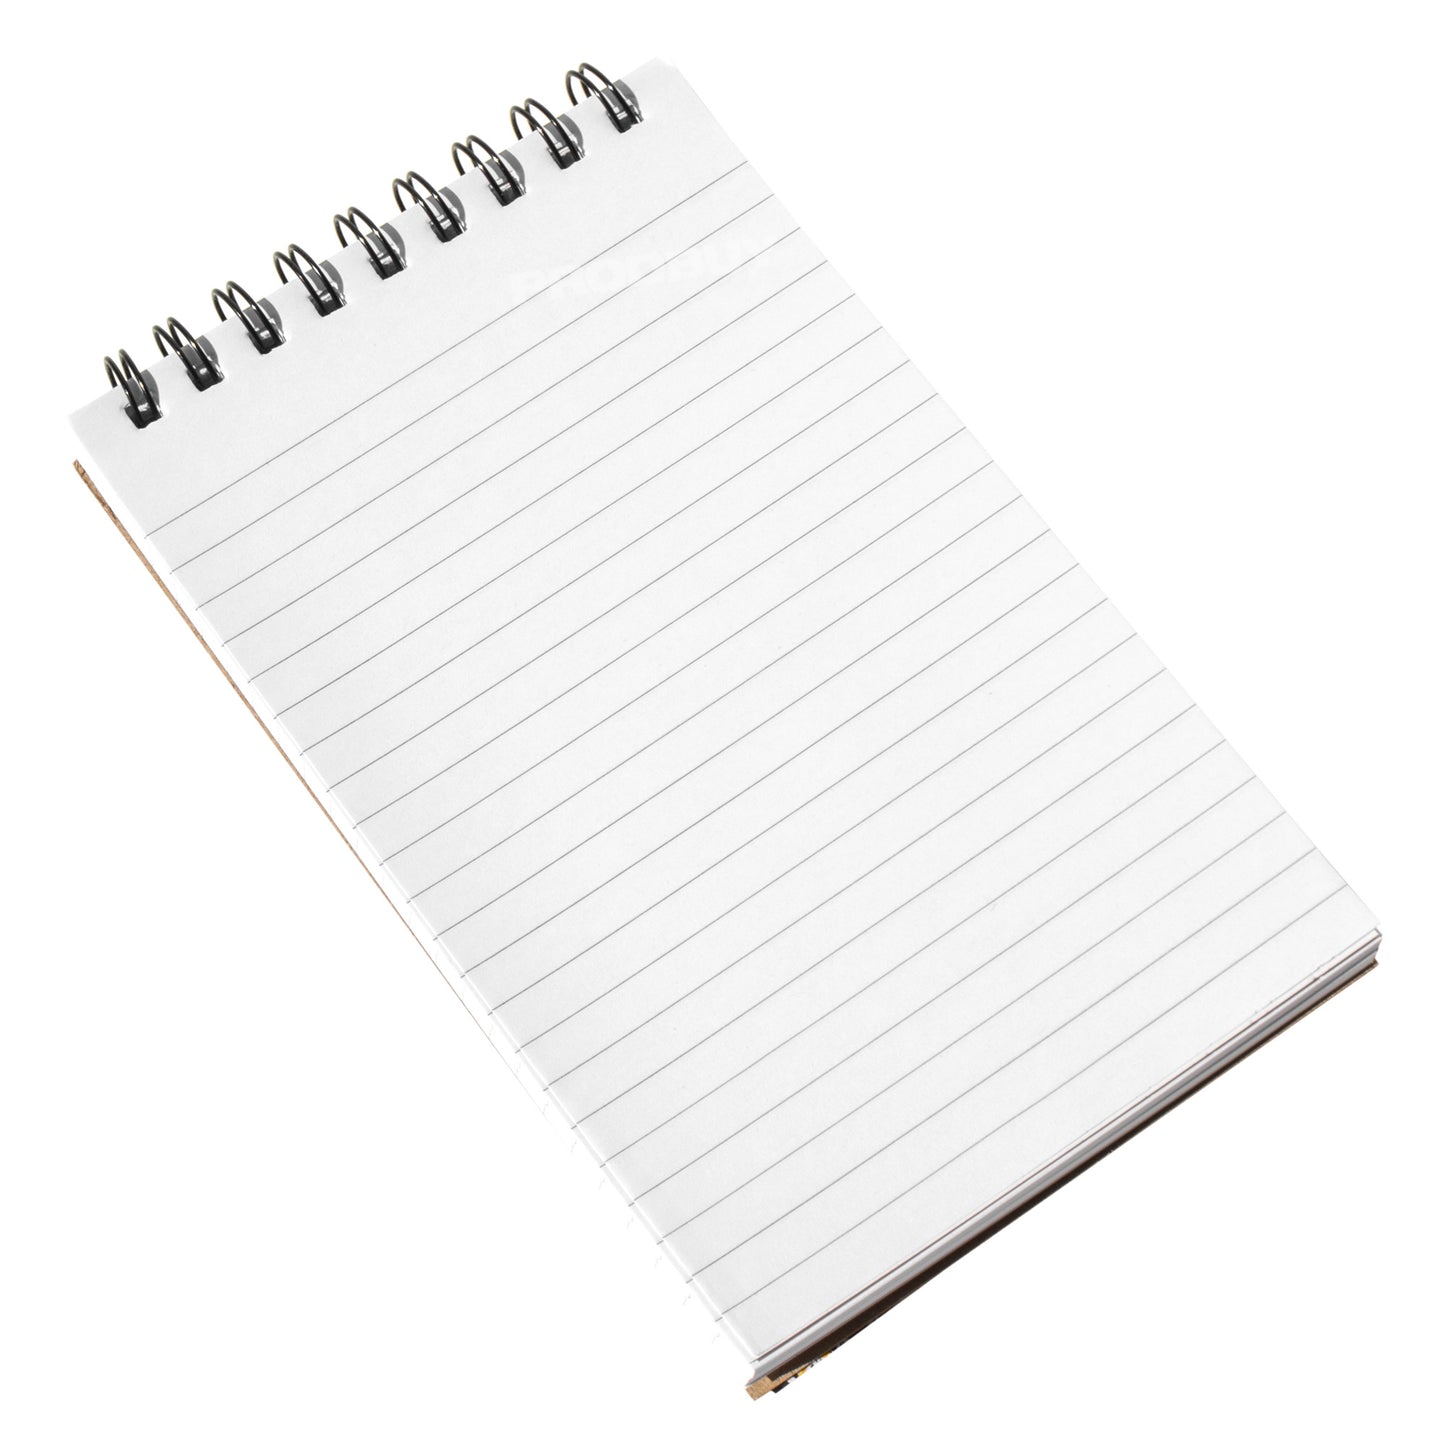 Pack of 3 Shorthand 5x8" Lined 80 Sheet Notepads with Floral Pattern